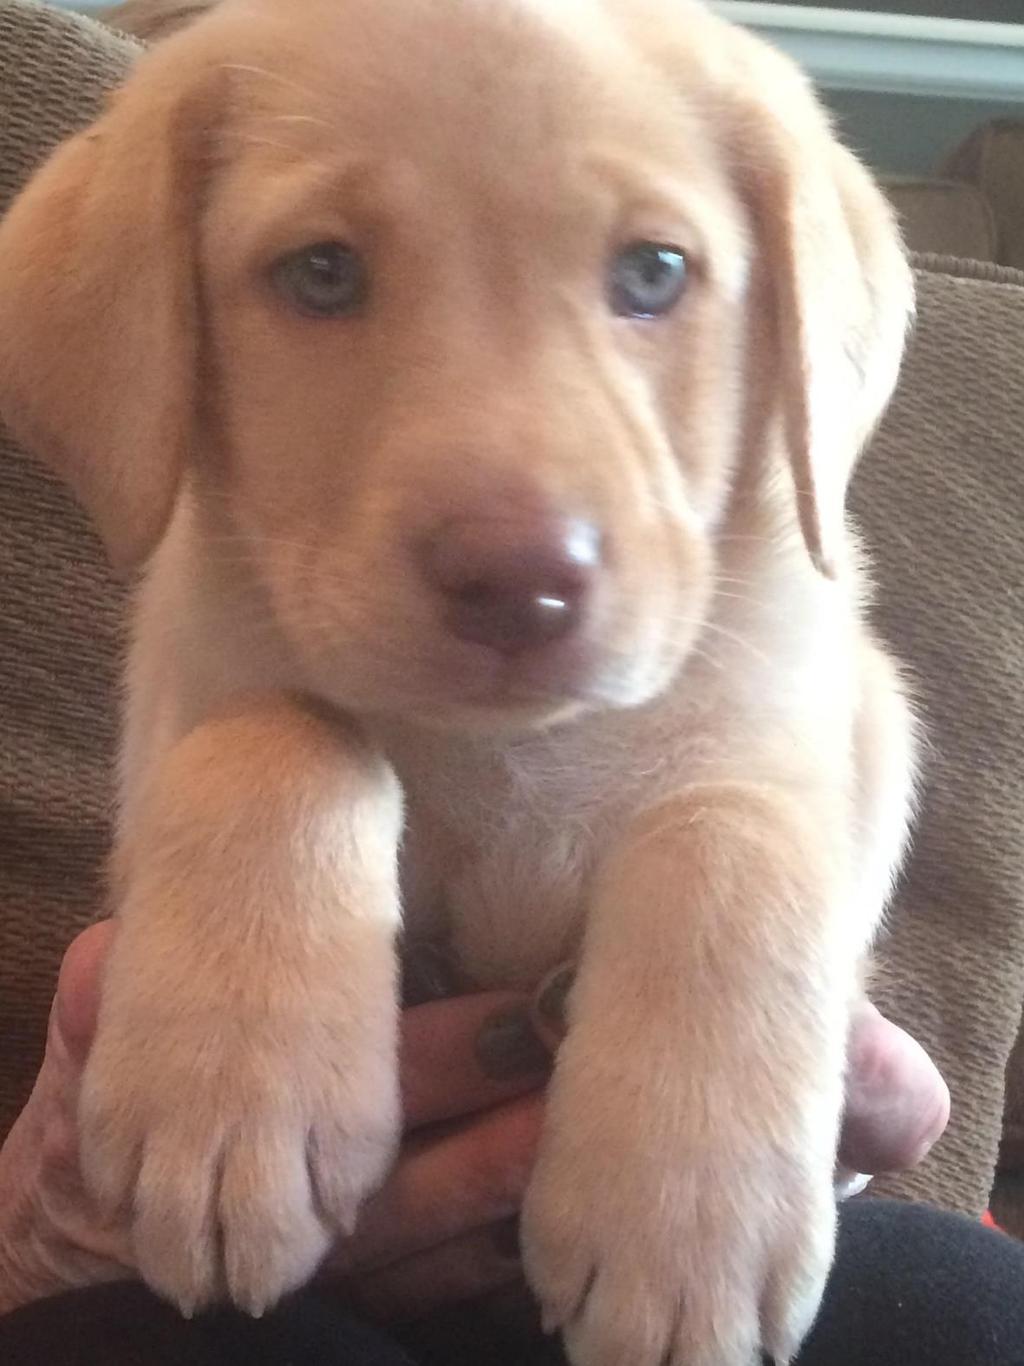 109. Puppy Love Big paws, sweet eyes and a swishing tail will steal your heart. This 10 week old AKC certified female yellow Labrador Retriever will bring years of joy and love to your family.